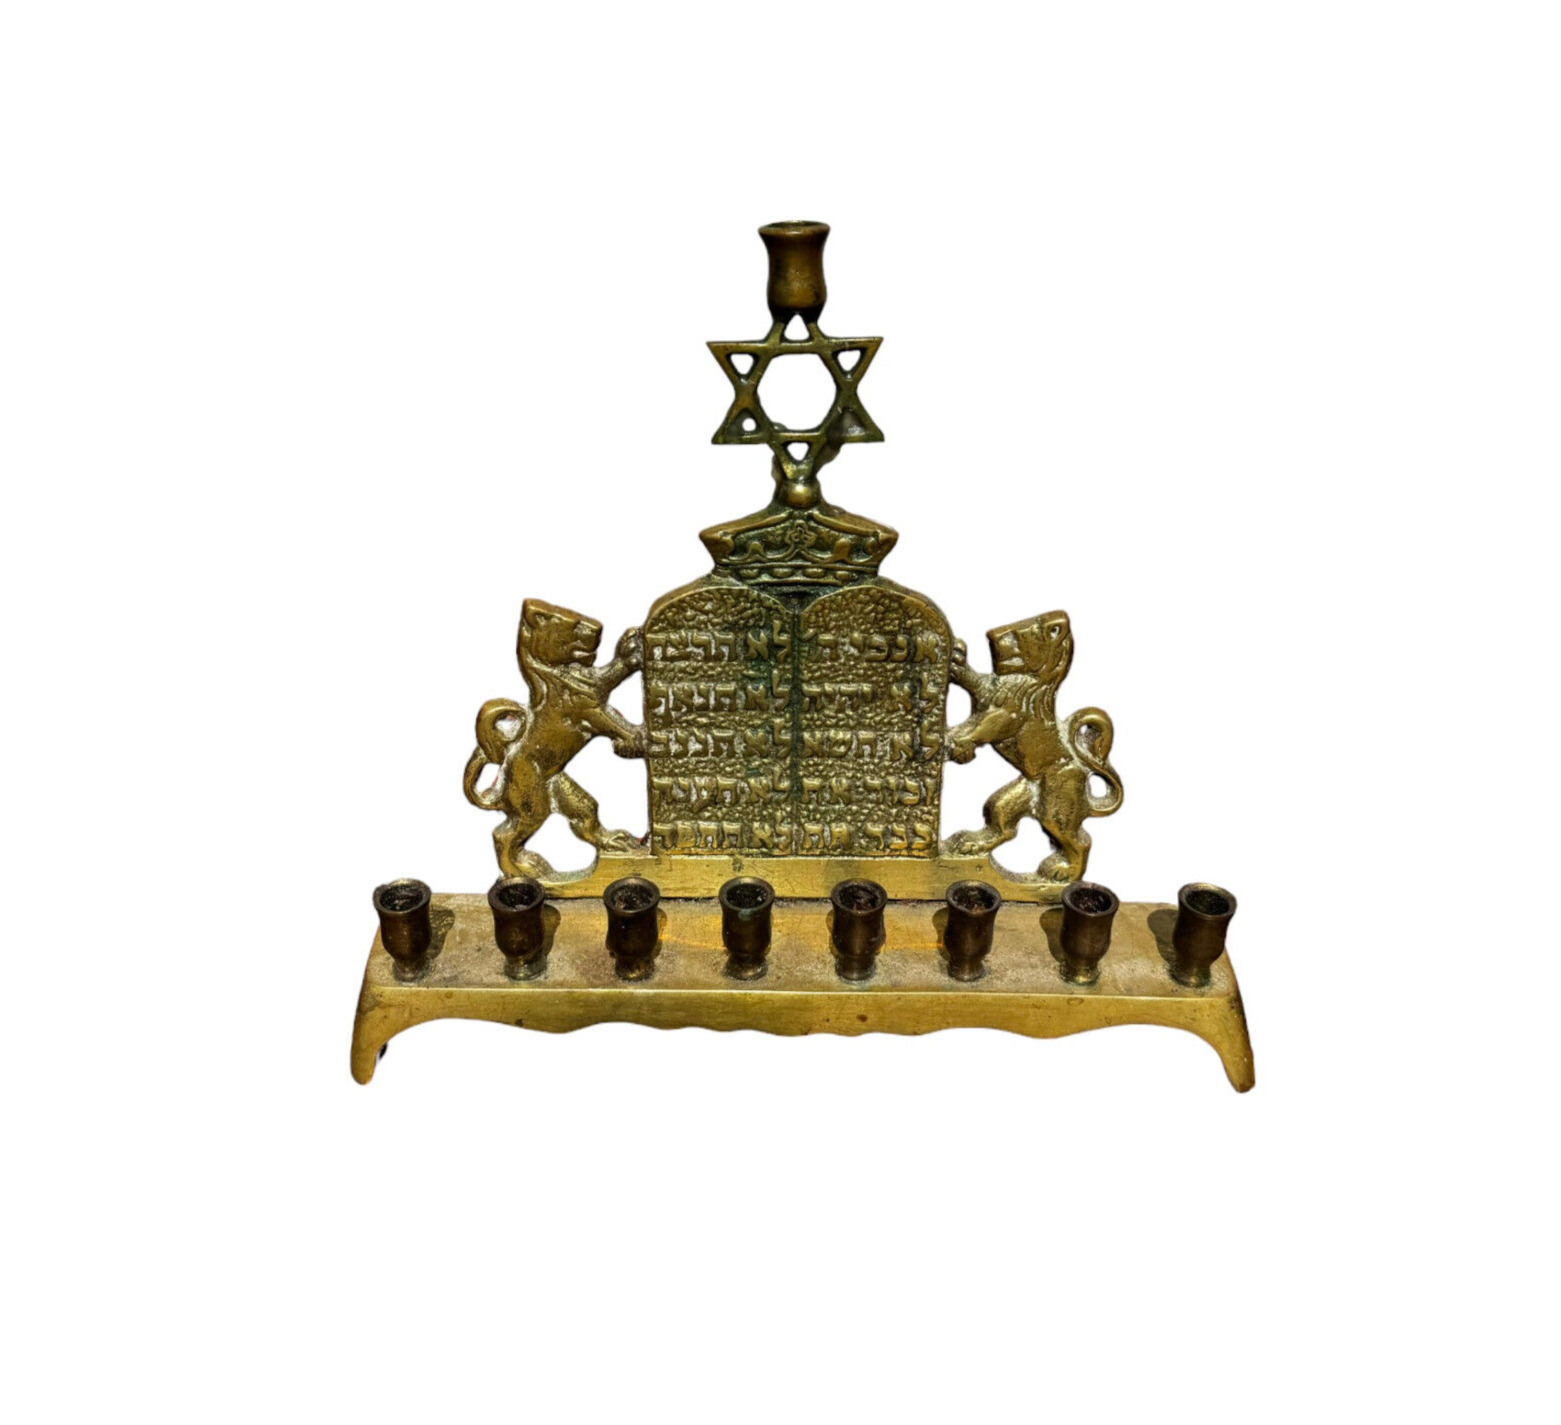 Antique European Brass Menorah with Star of David from the Lions of Judah